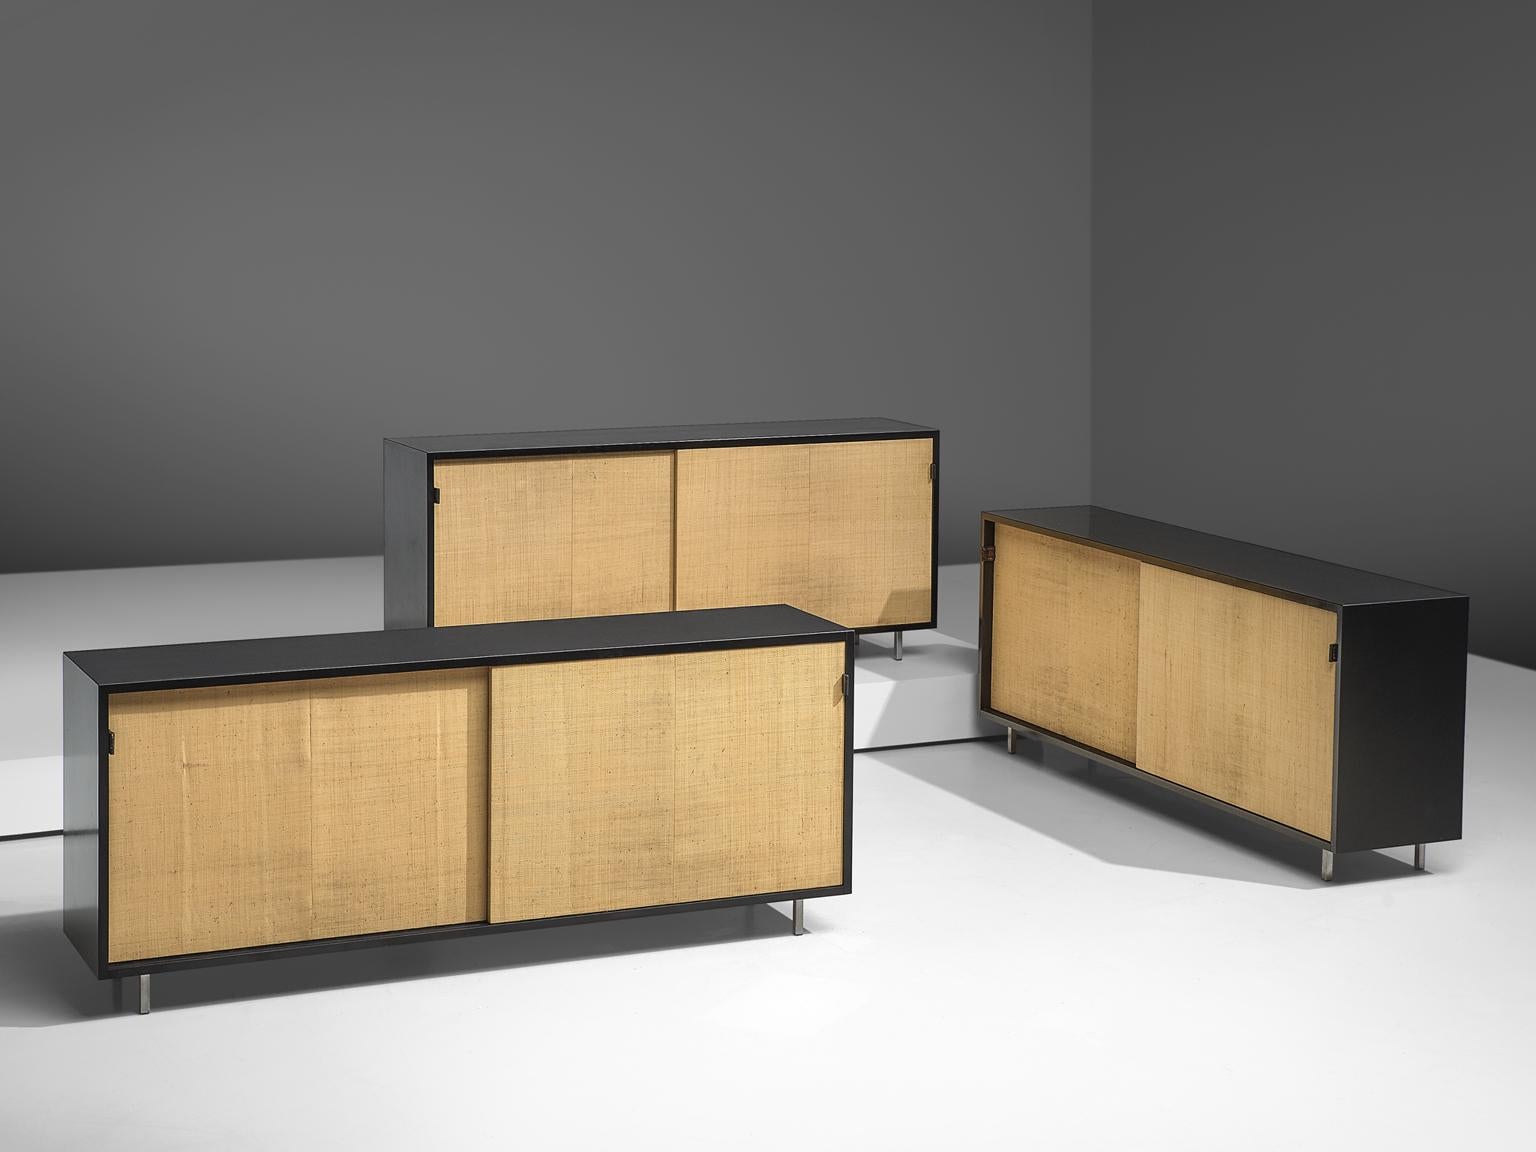 Florence Knoll for Knoll, sideboards, ebonized wood, metal, cane, United States, 1961.

These sideboards are designed by Florence Knoll for Knoll International and were meant for the headquarters of Knoll in Italy. The credenzas are executed with